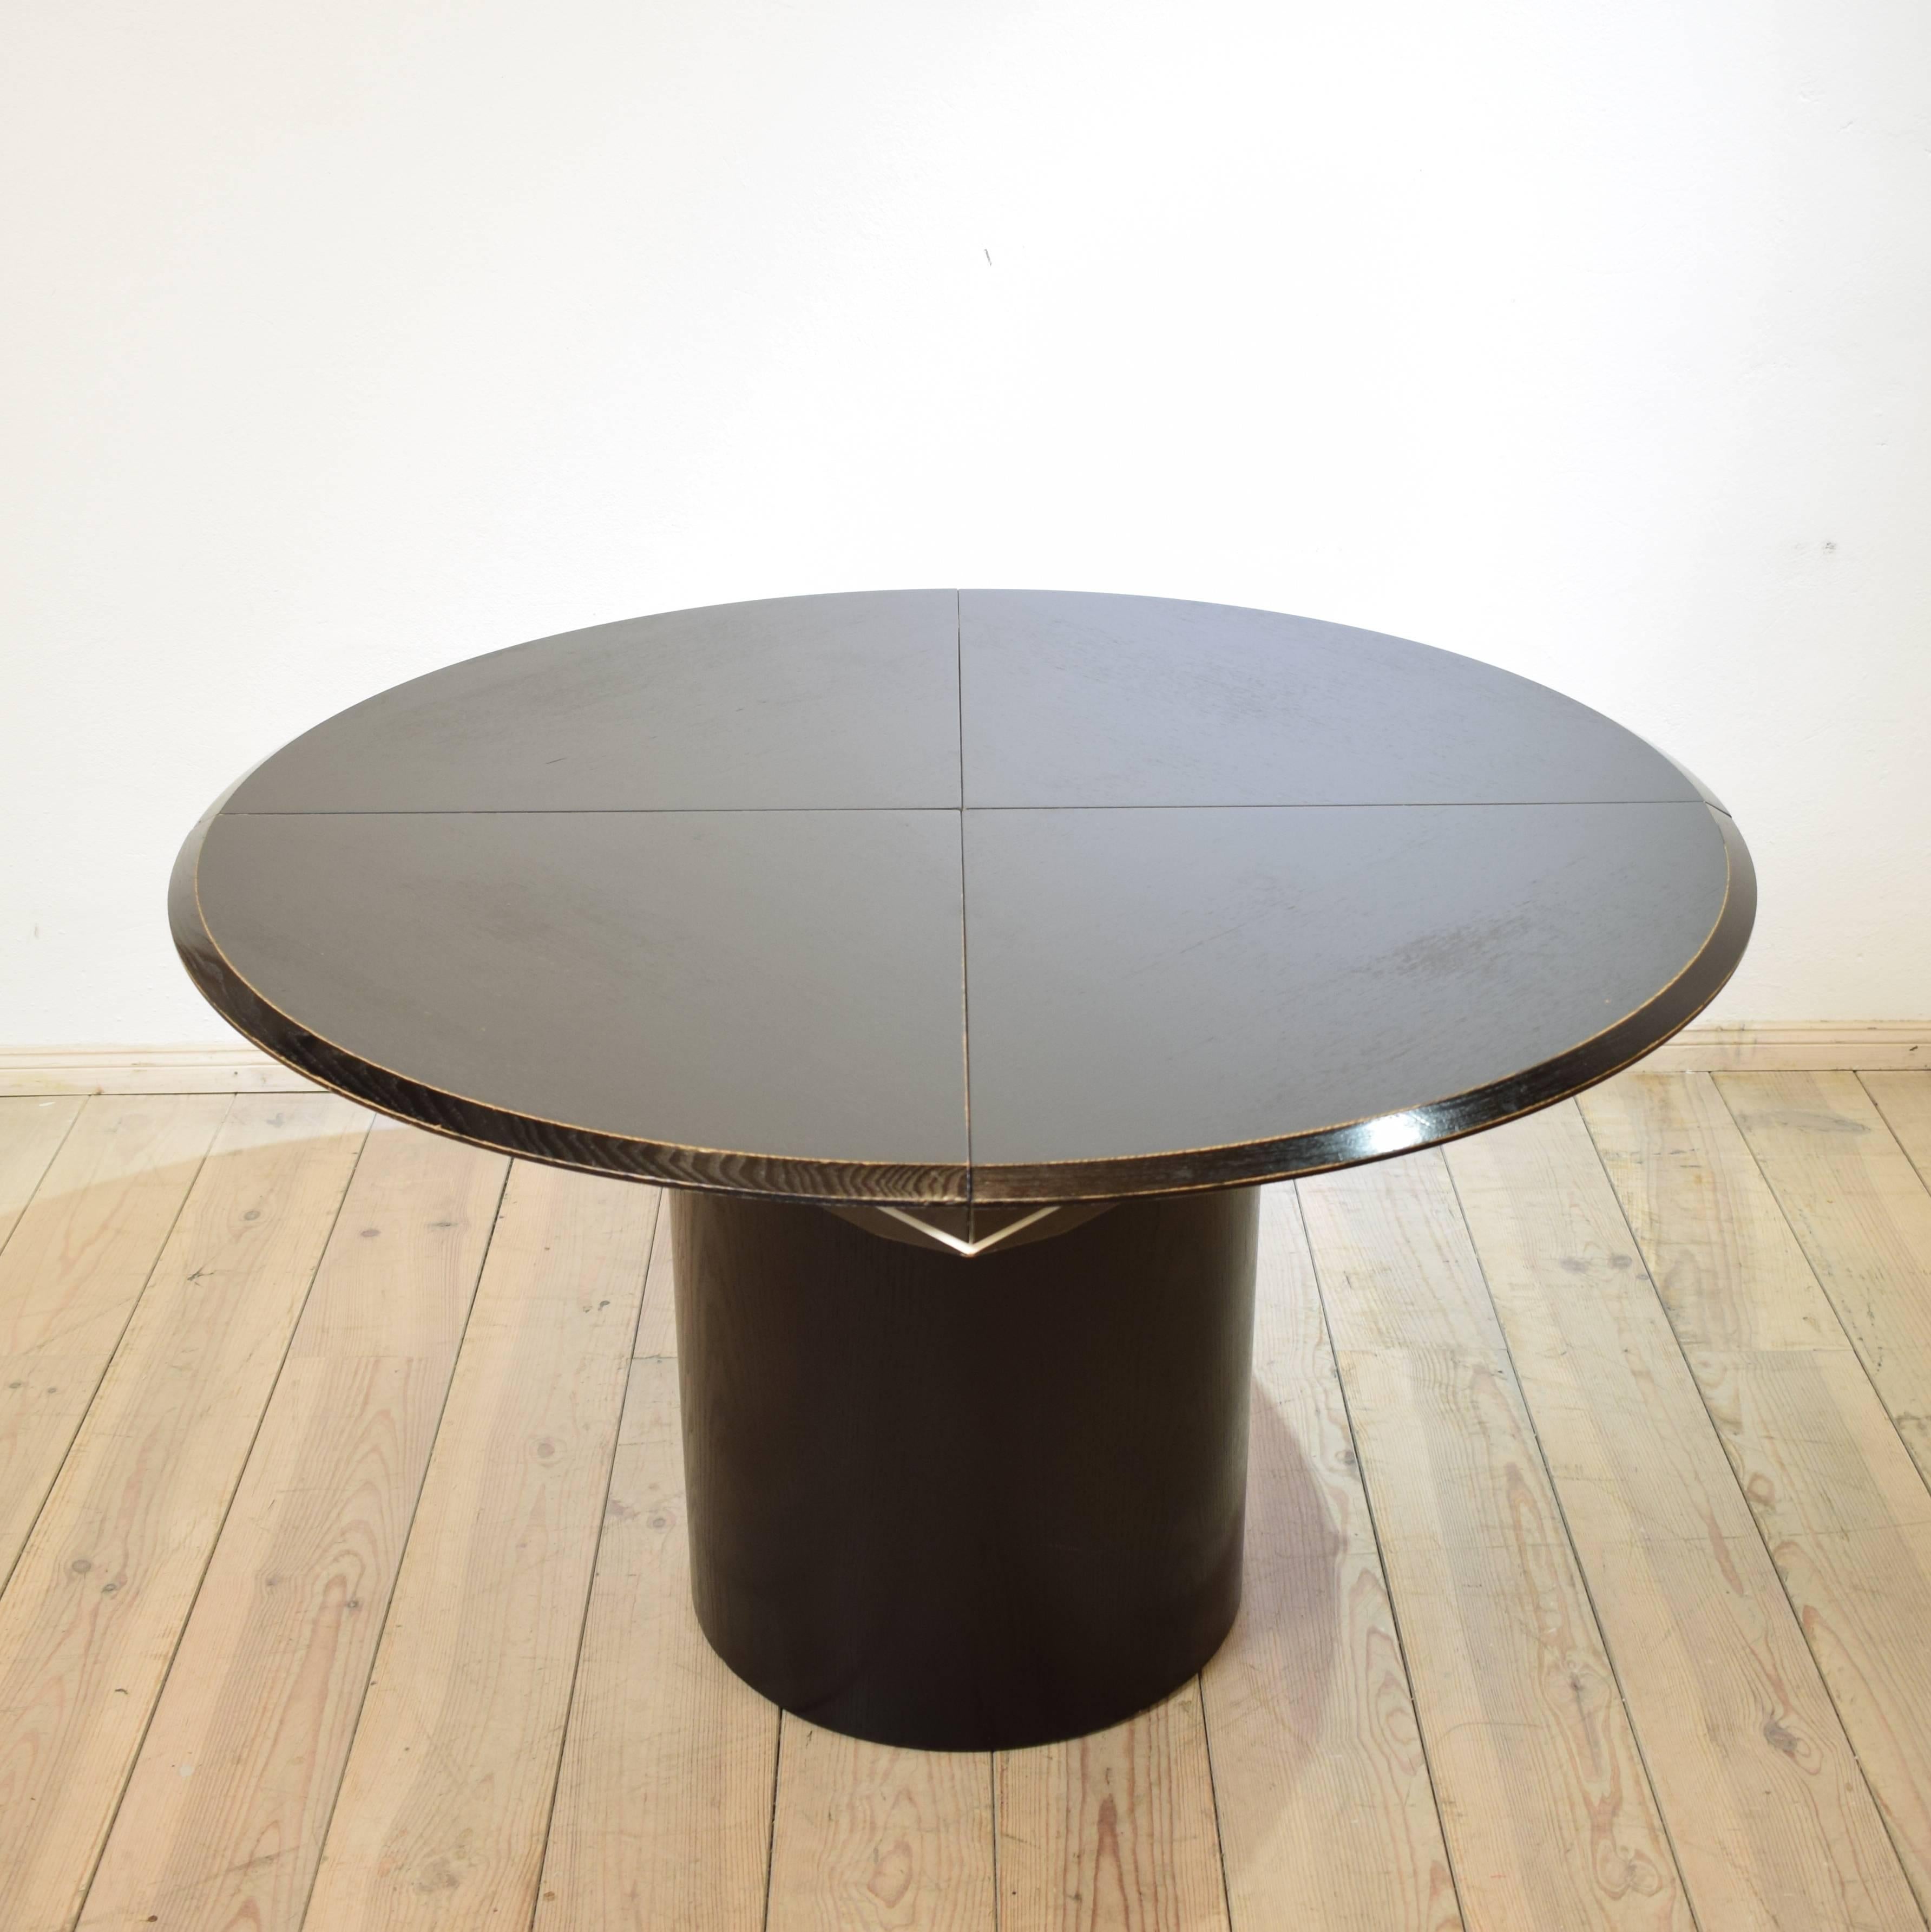 This bi-colored black and white dining table version of the famous 